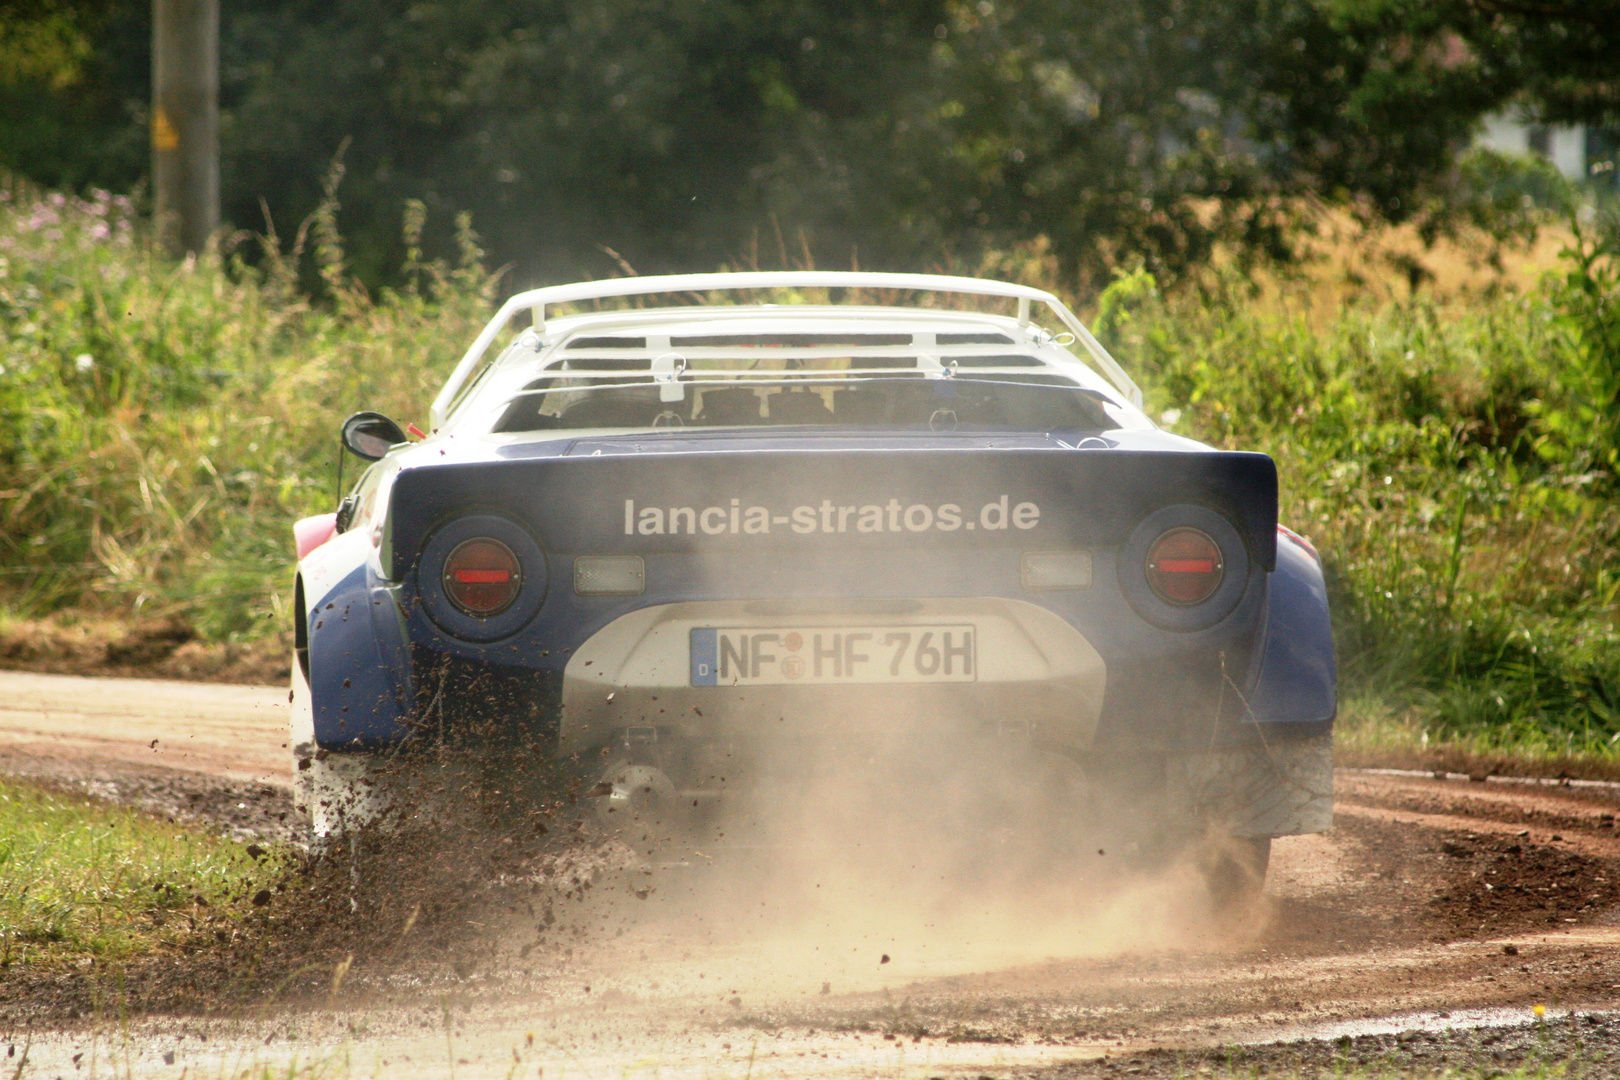 Stratos in Action